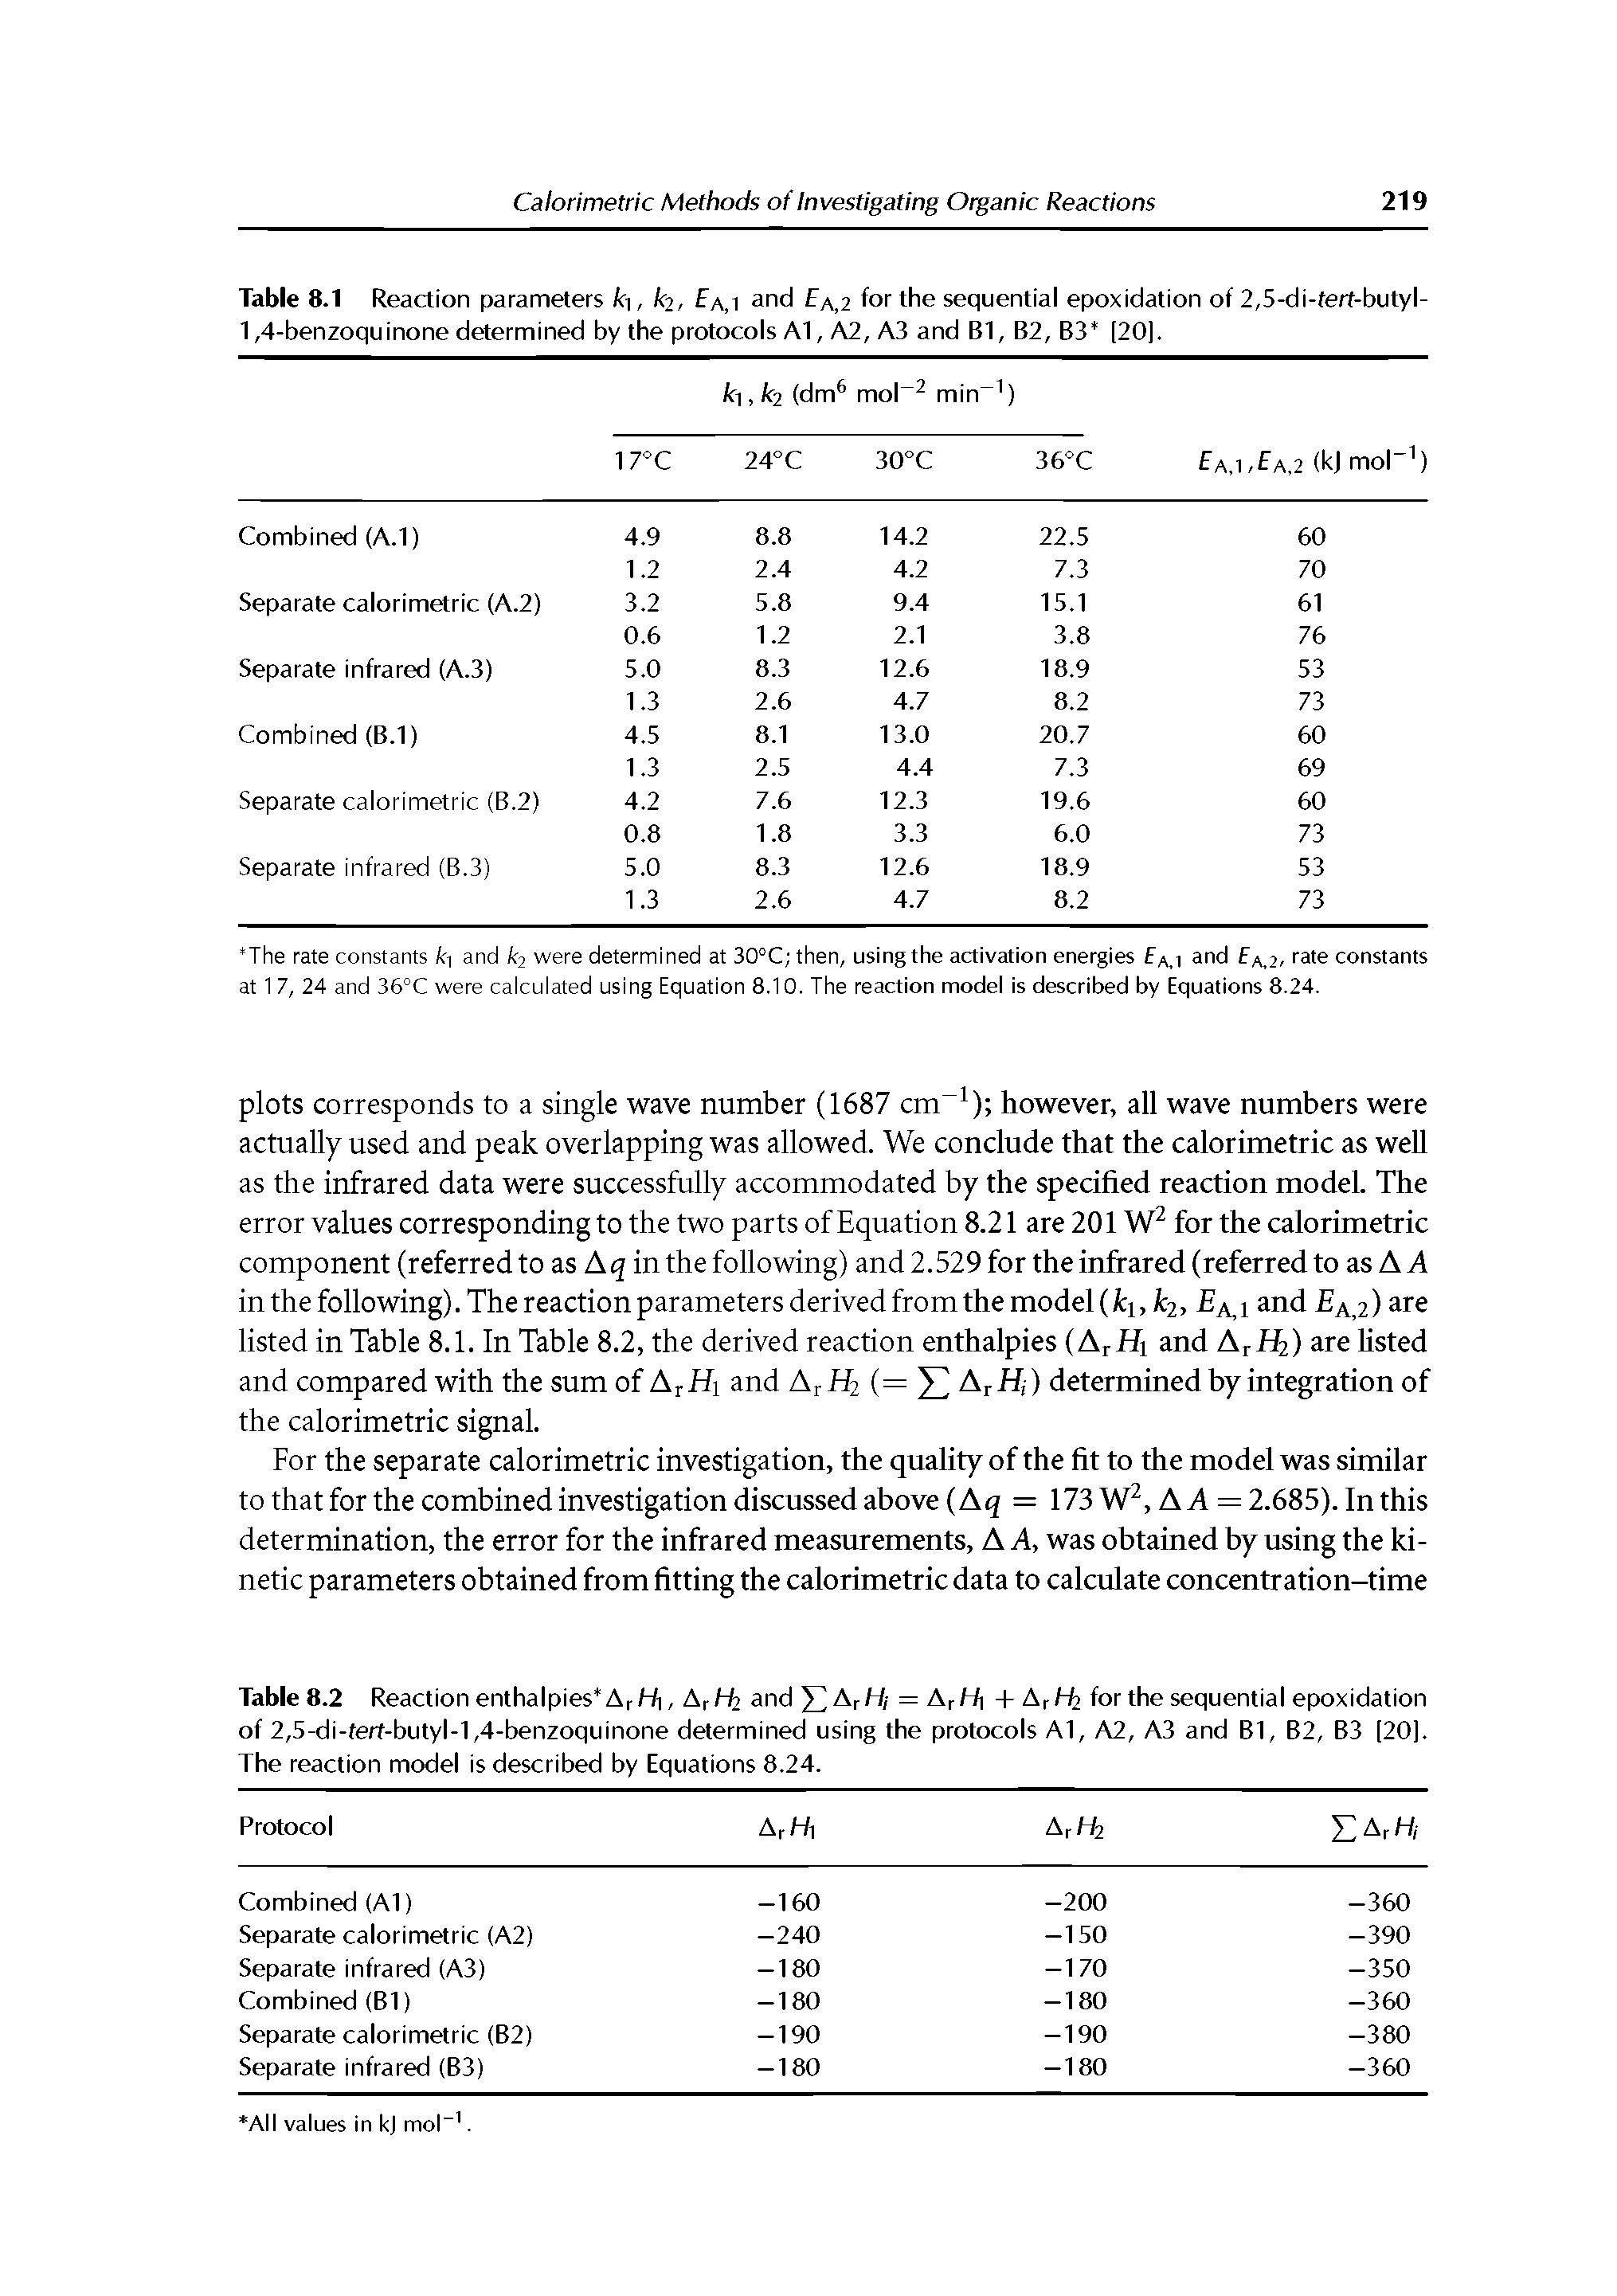 Table 8.1 Reaction parameters Ari, /o, f a, i and Ea,2 for the sequential epoxidation of 2,5-di-ferf-butyl-1,4-benzoquinone determined by the protocols A1, A2, A3 and B1, B2, B3 [20].